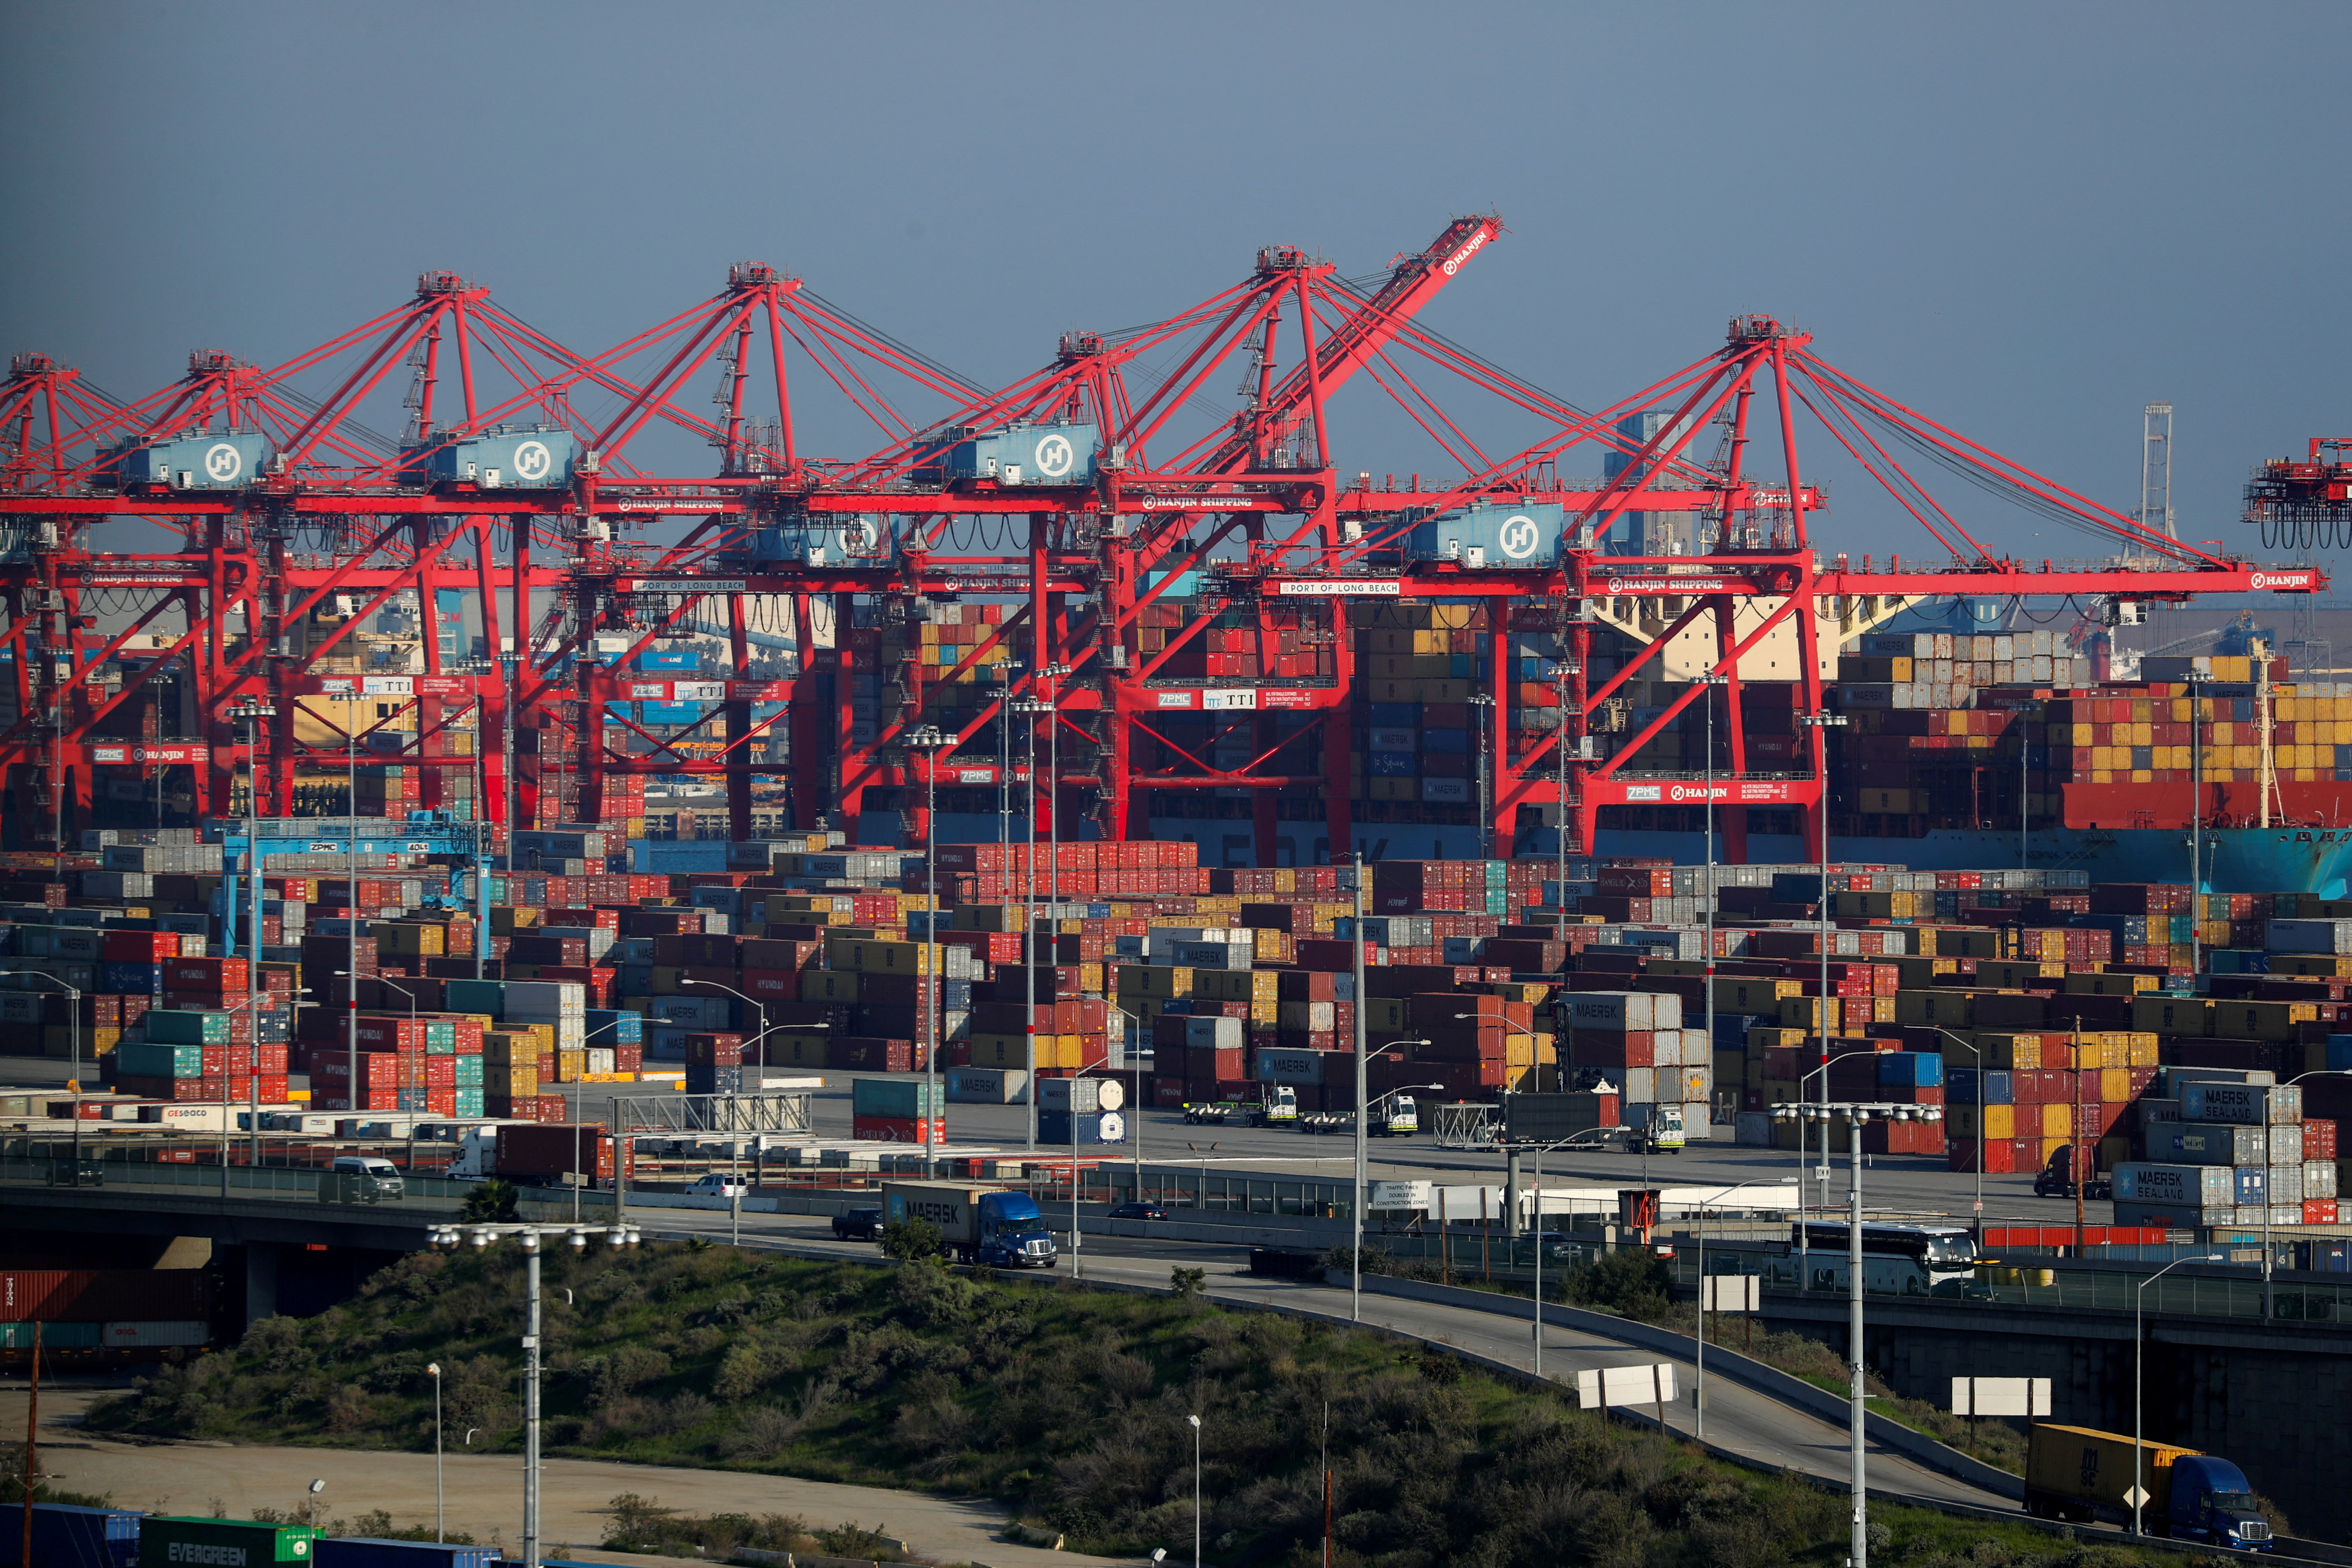 Ships and shipping containers are pictured at the port of Long Beach in Long Beach, California